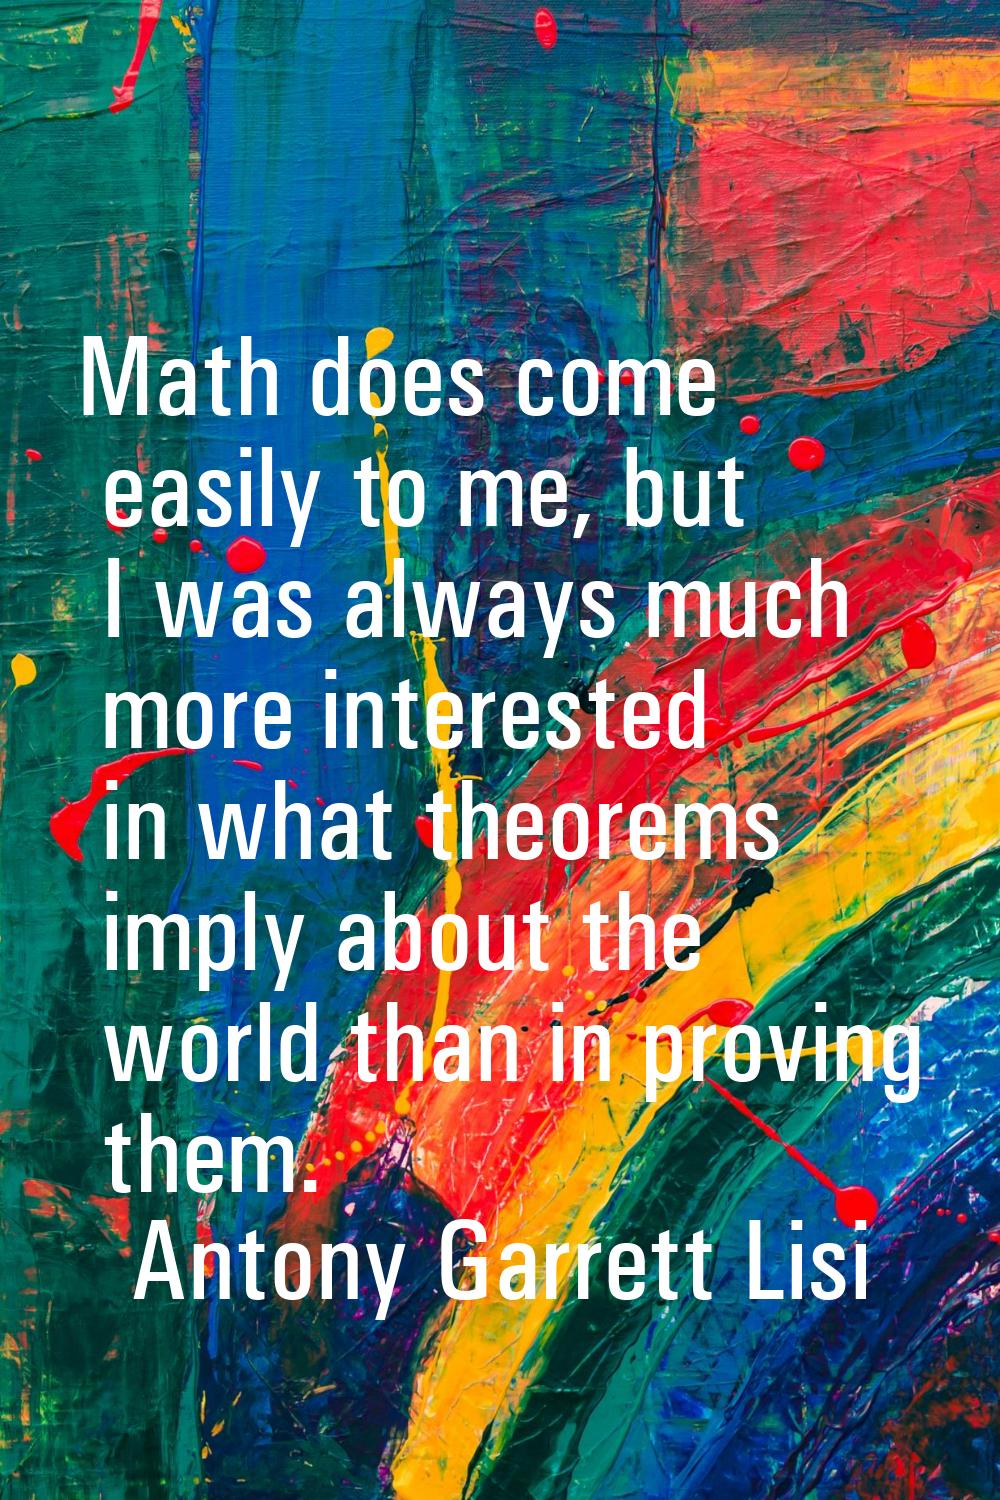 Math does come easily to me, but I was always much more interested in what theorems imply about the